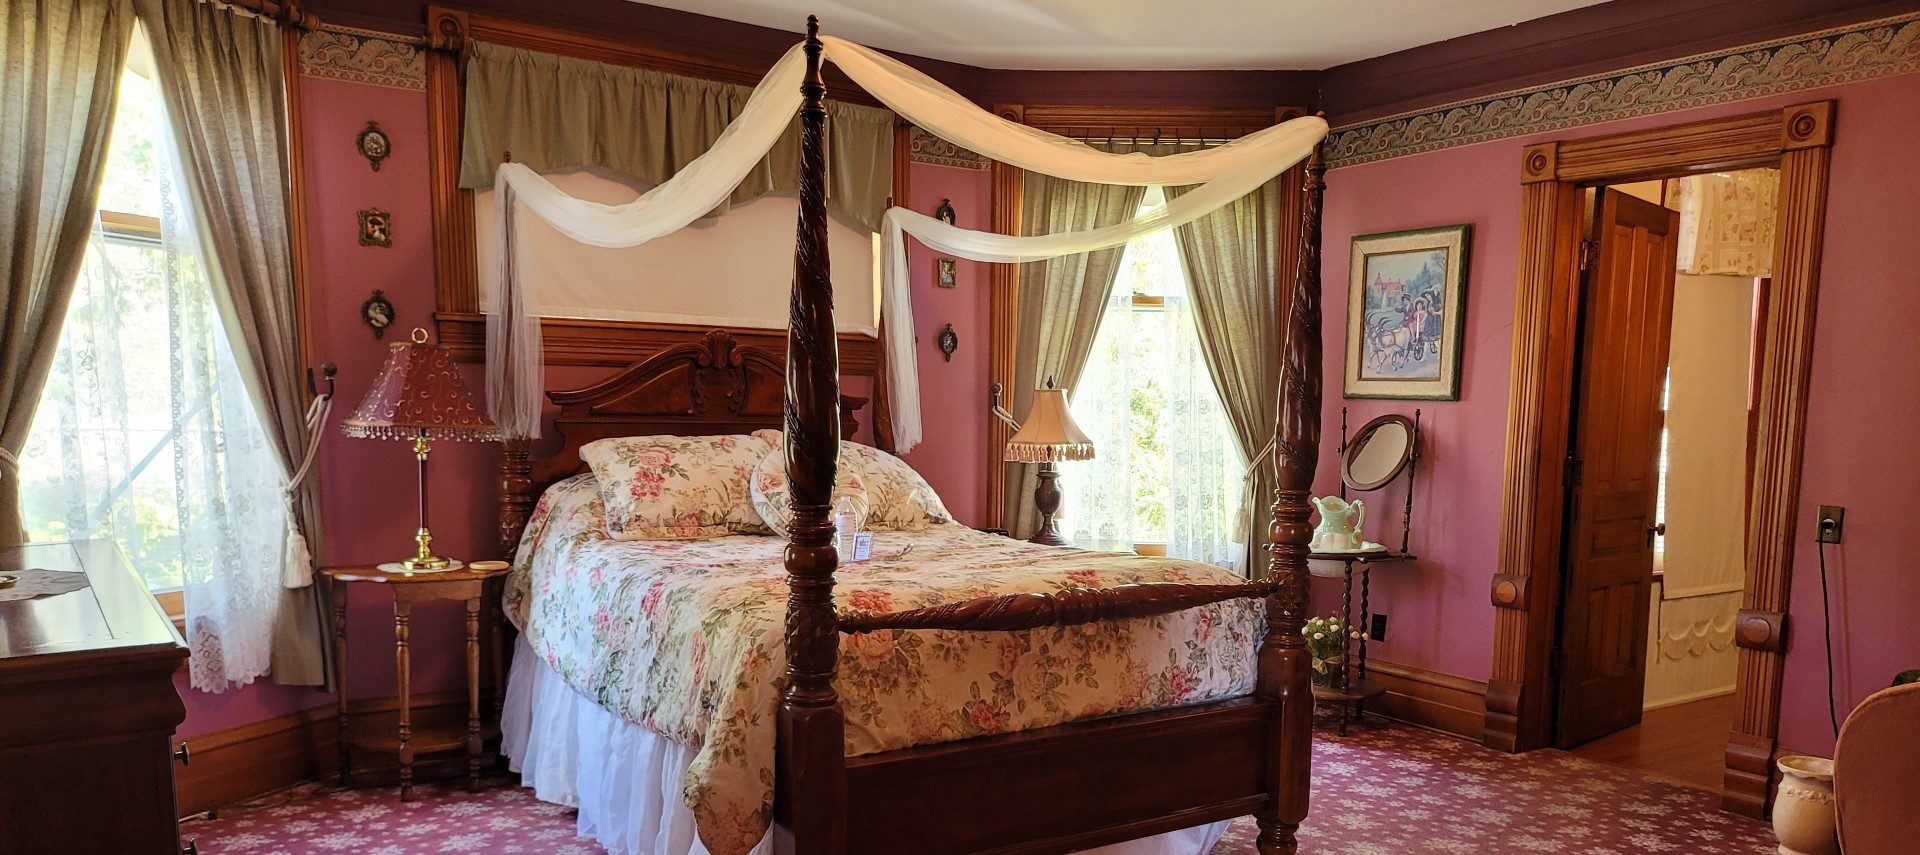 Elegant guest room in a historic home with a four poster bed, red walls and patterned carpet